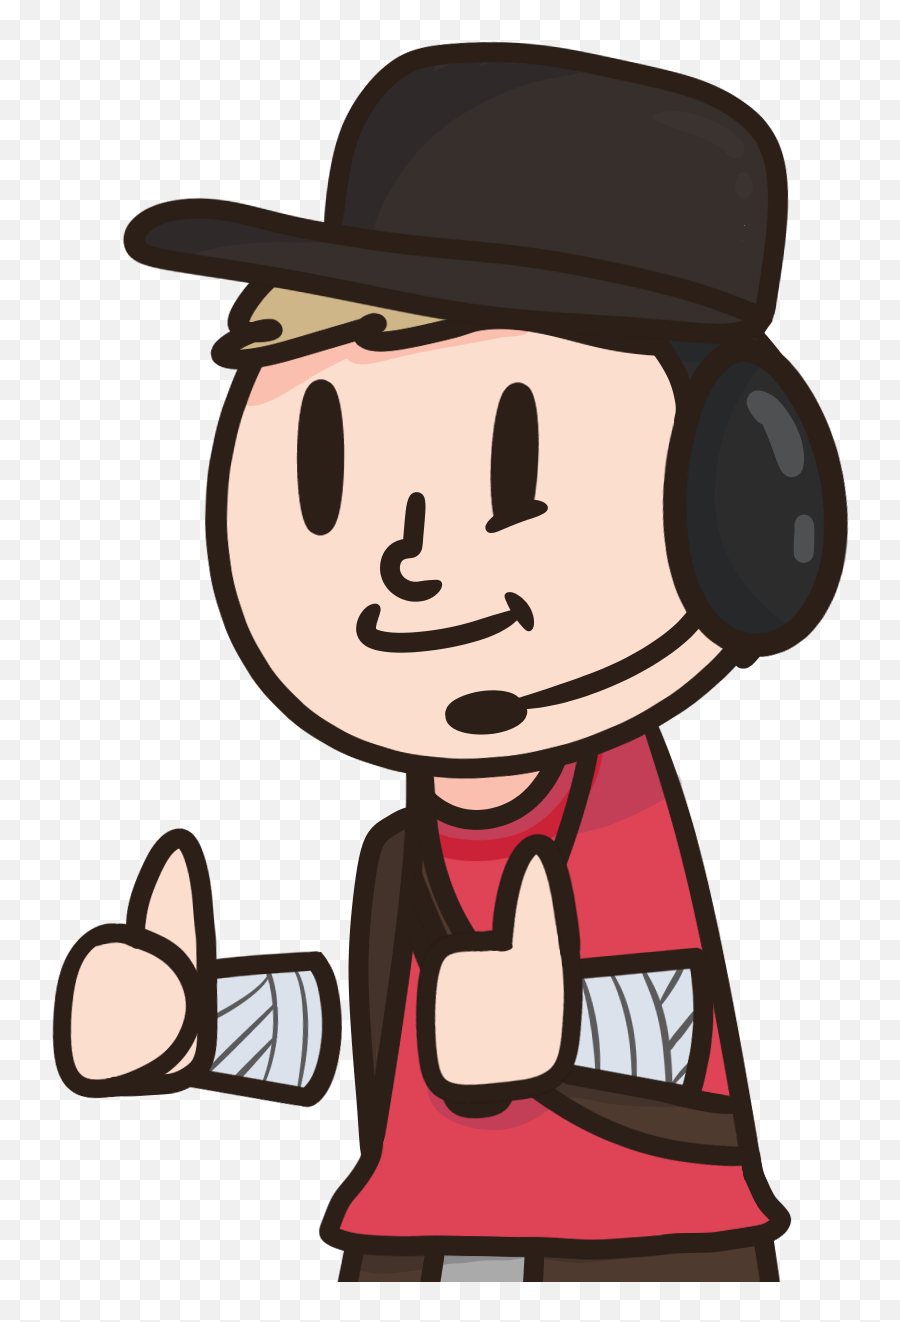 Scout From Tf2 By Doubtfulbread On Newgrounds Emoji,Tf2 Png